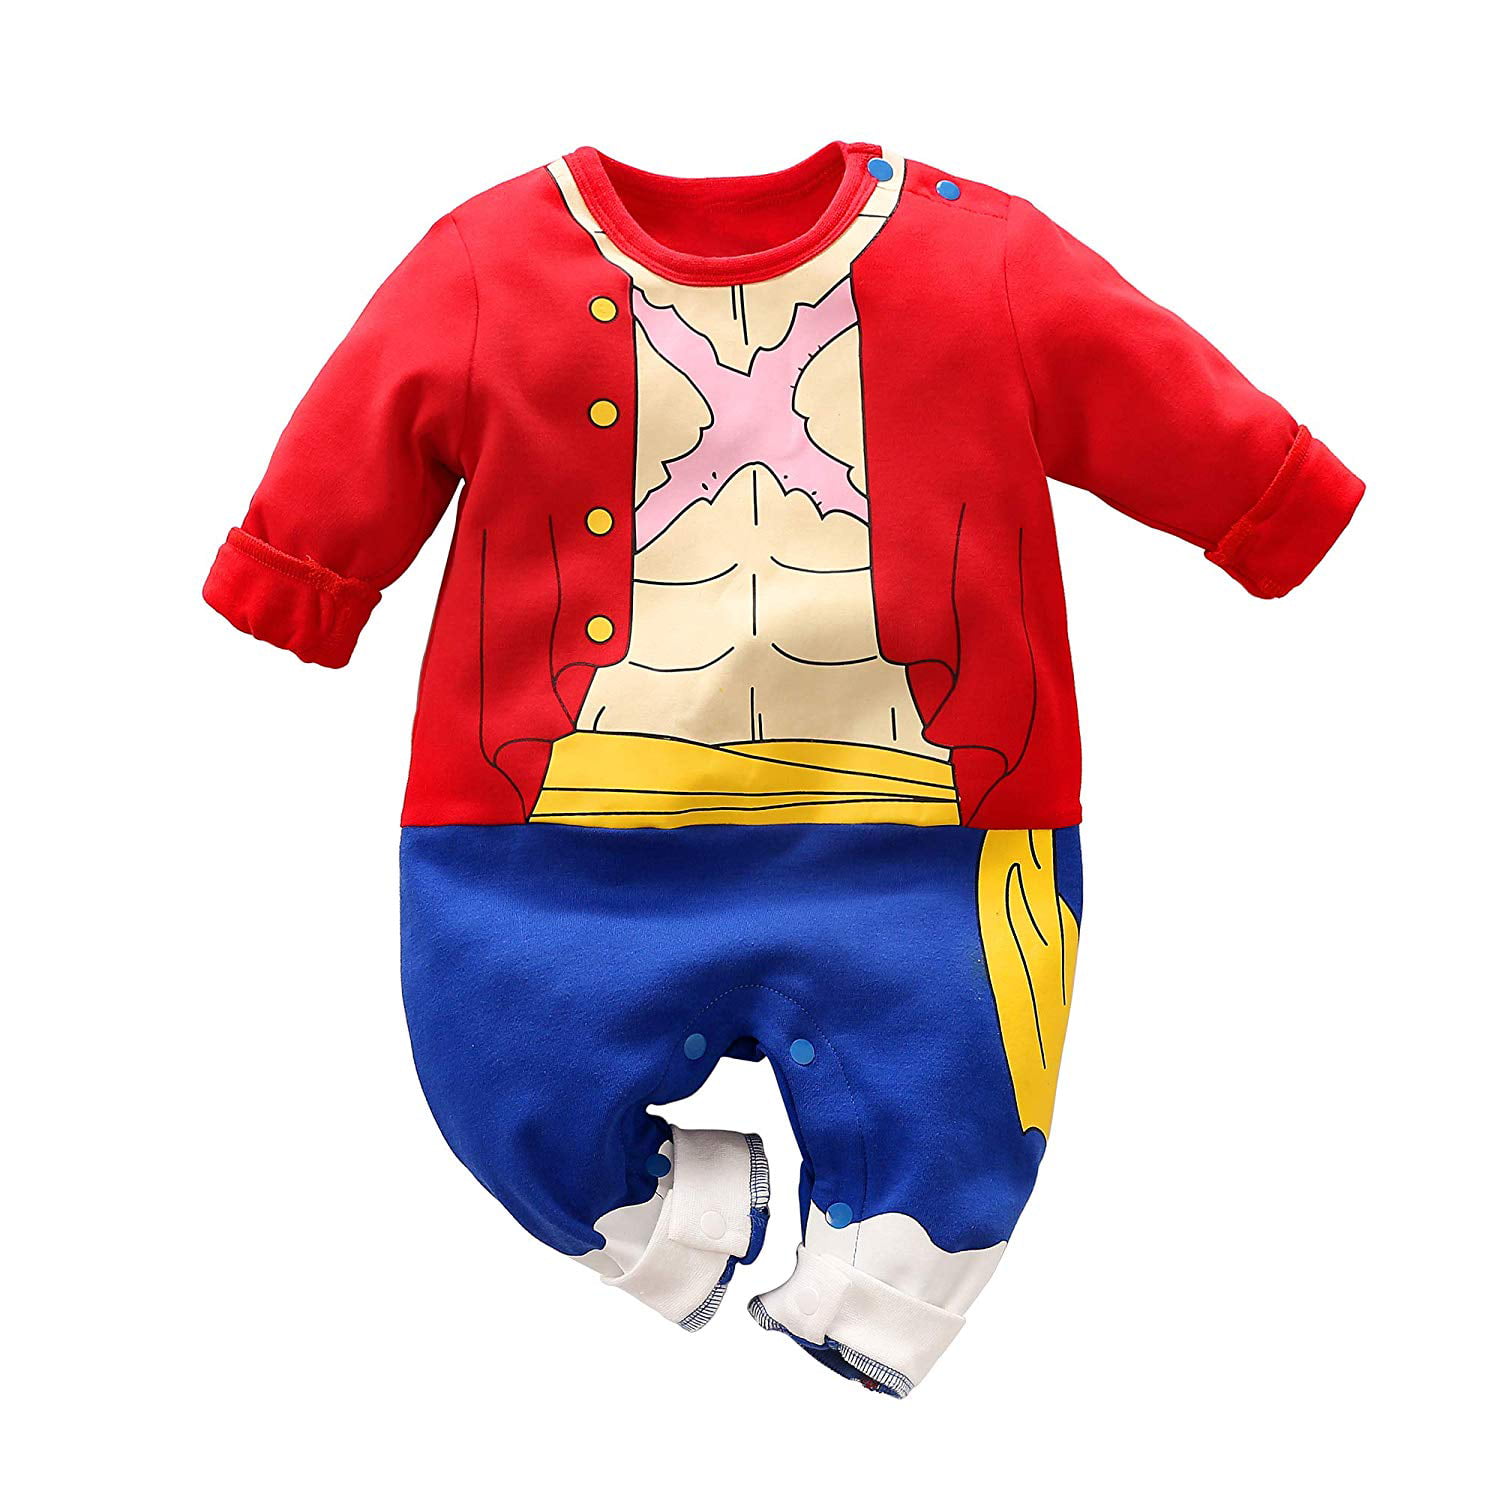 Baby Rompers Boys Girls Infants ONE Piece Cartoon Outfits Button Cotton Jumpsuit Long Sleeve Red&Blue2 3-6 Months/66